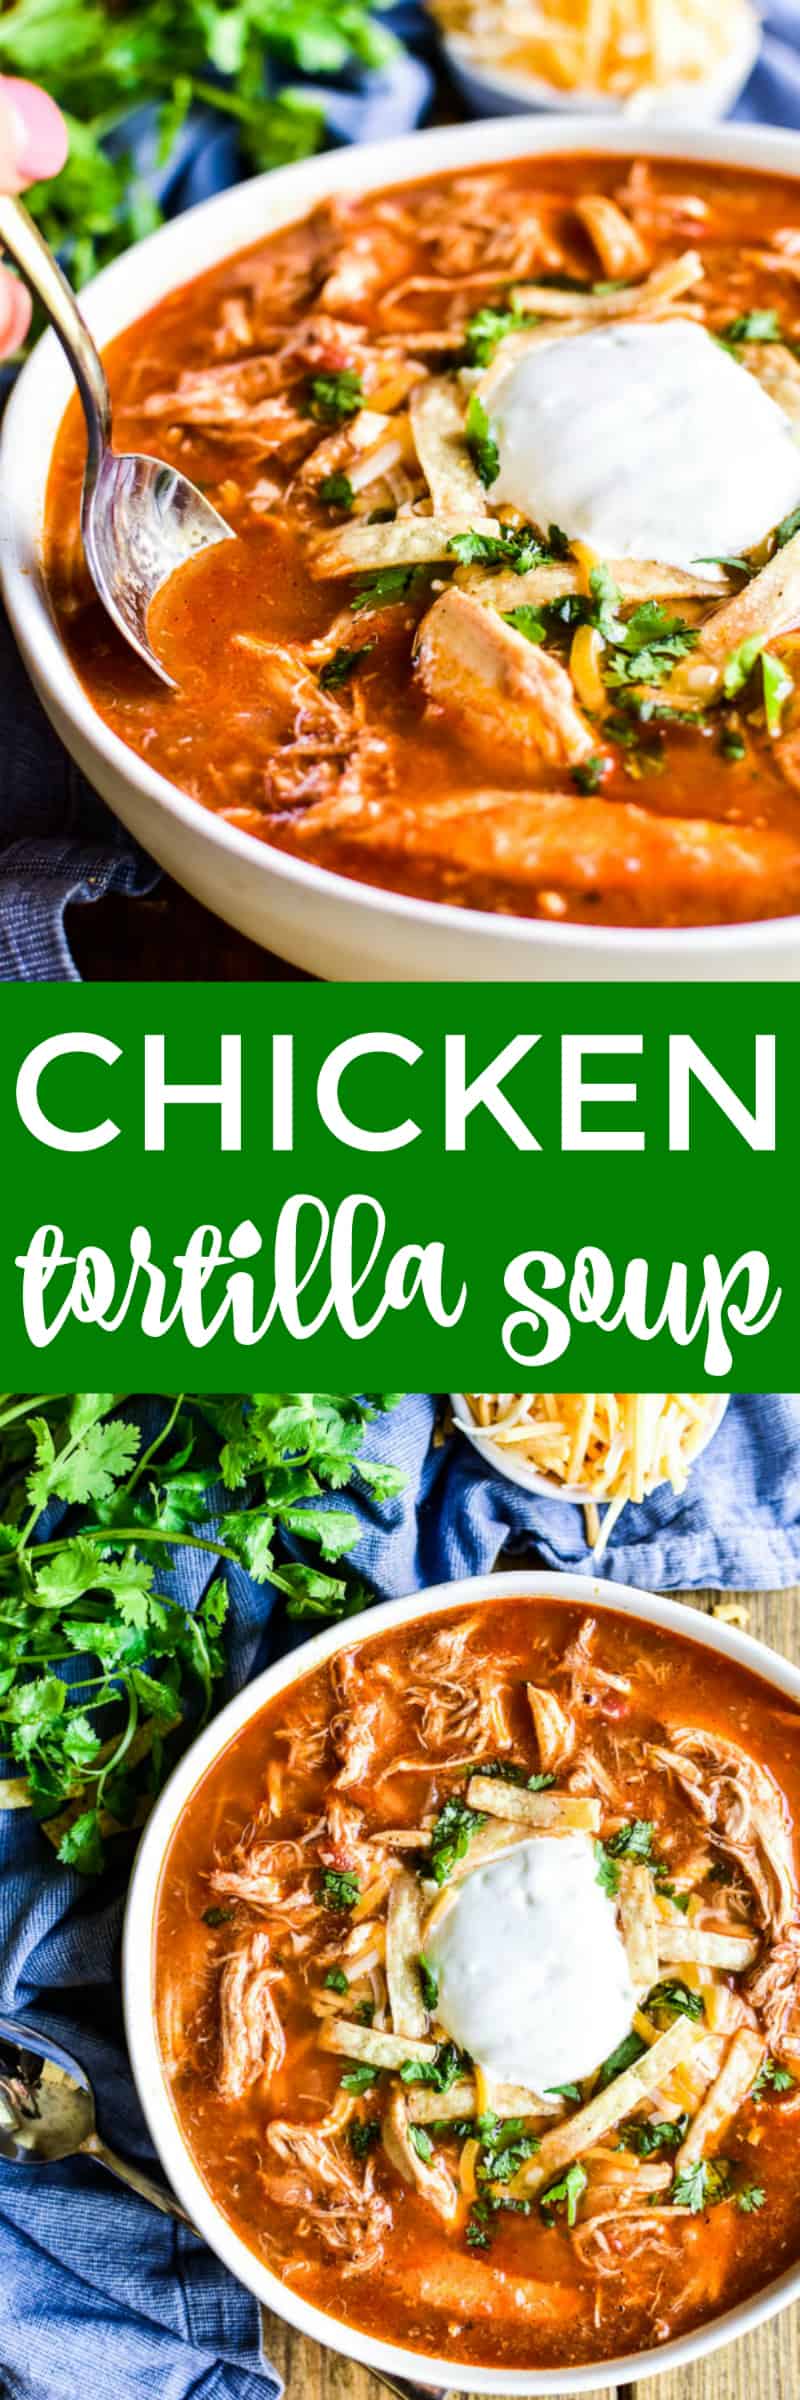 Collage image of Chicken Tortilla Soup